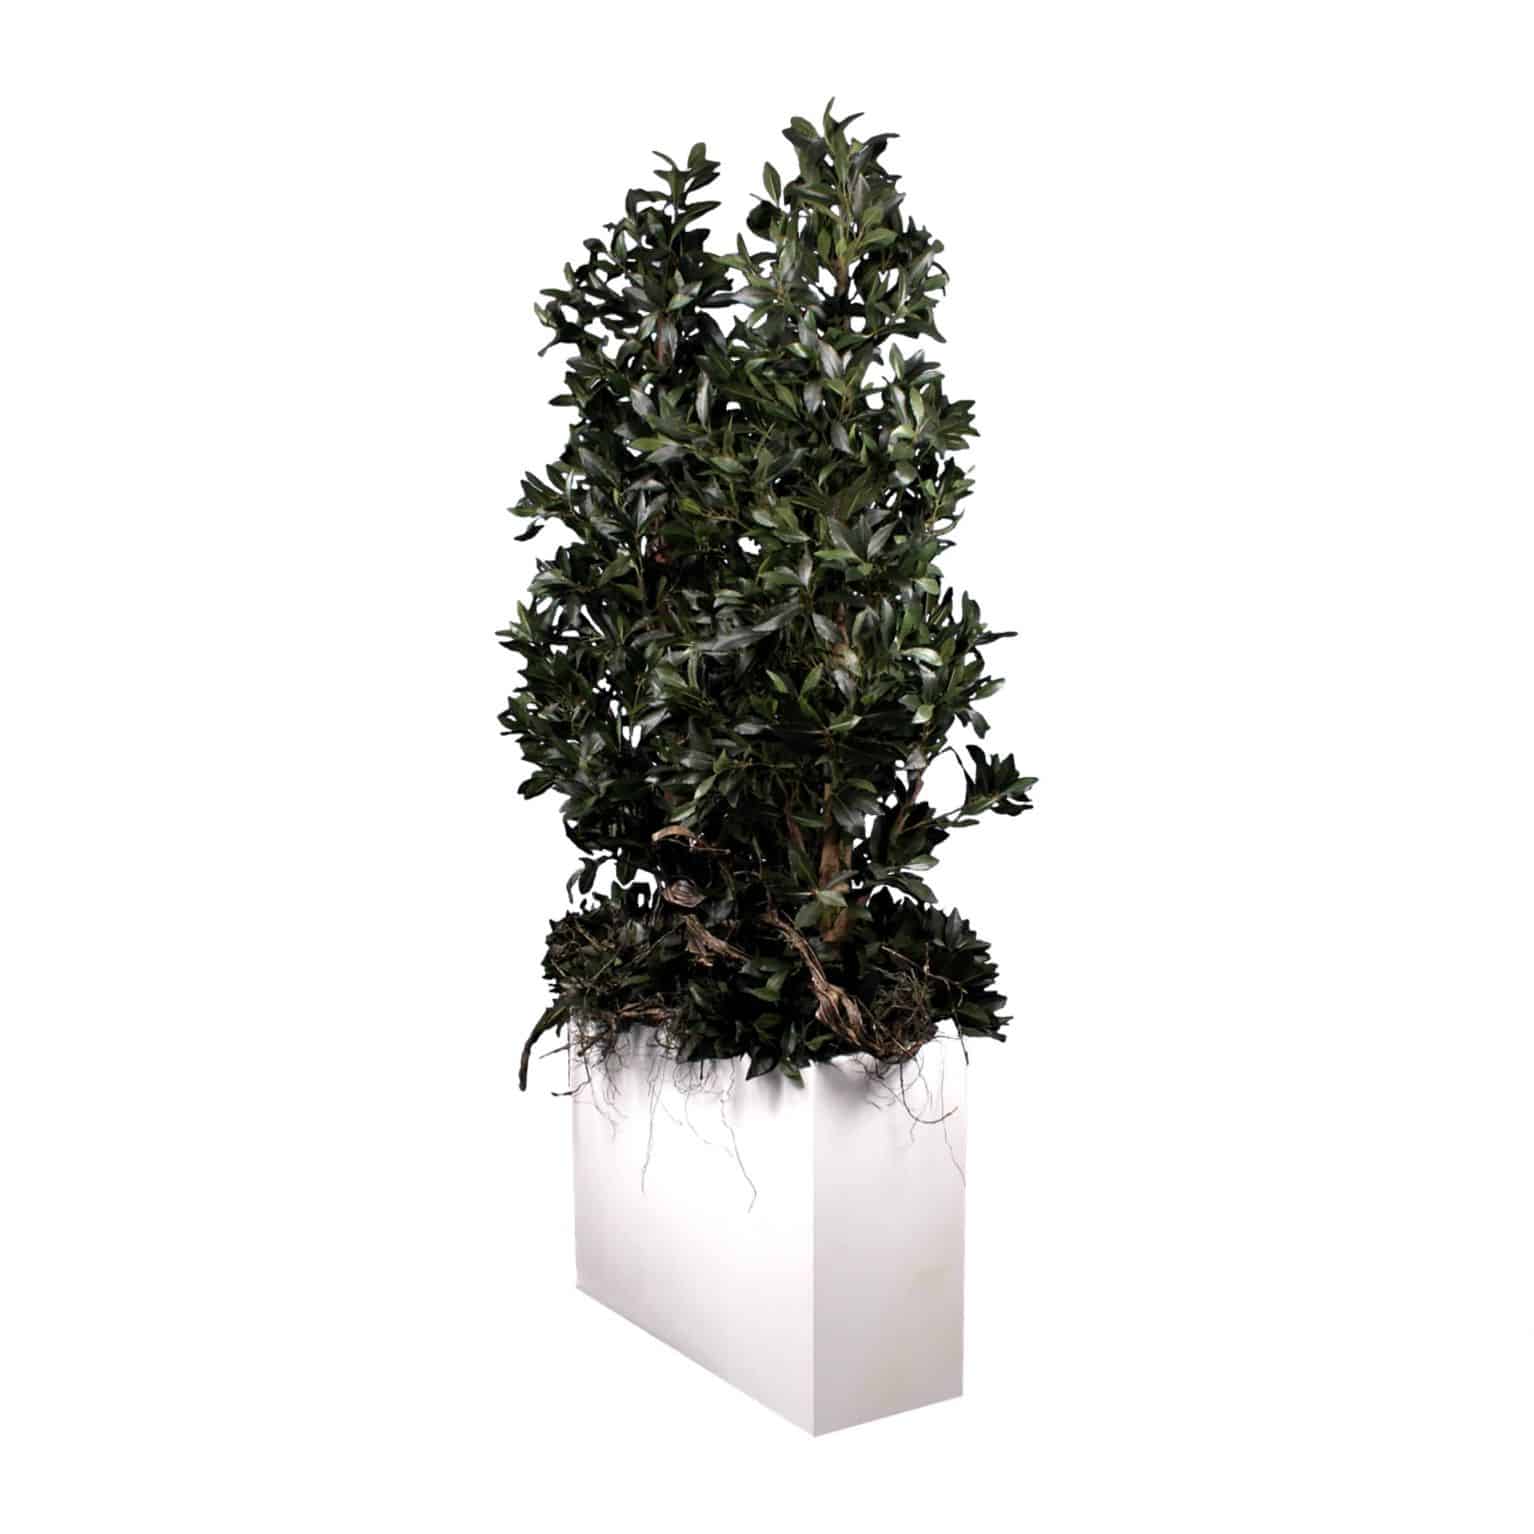 Buy our artificial sweet bay tree arrangement with real tree bark trunks and natural colouring. A modern design - popular